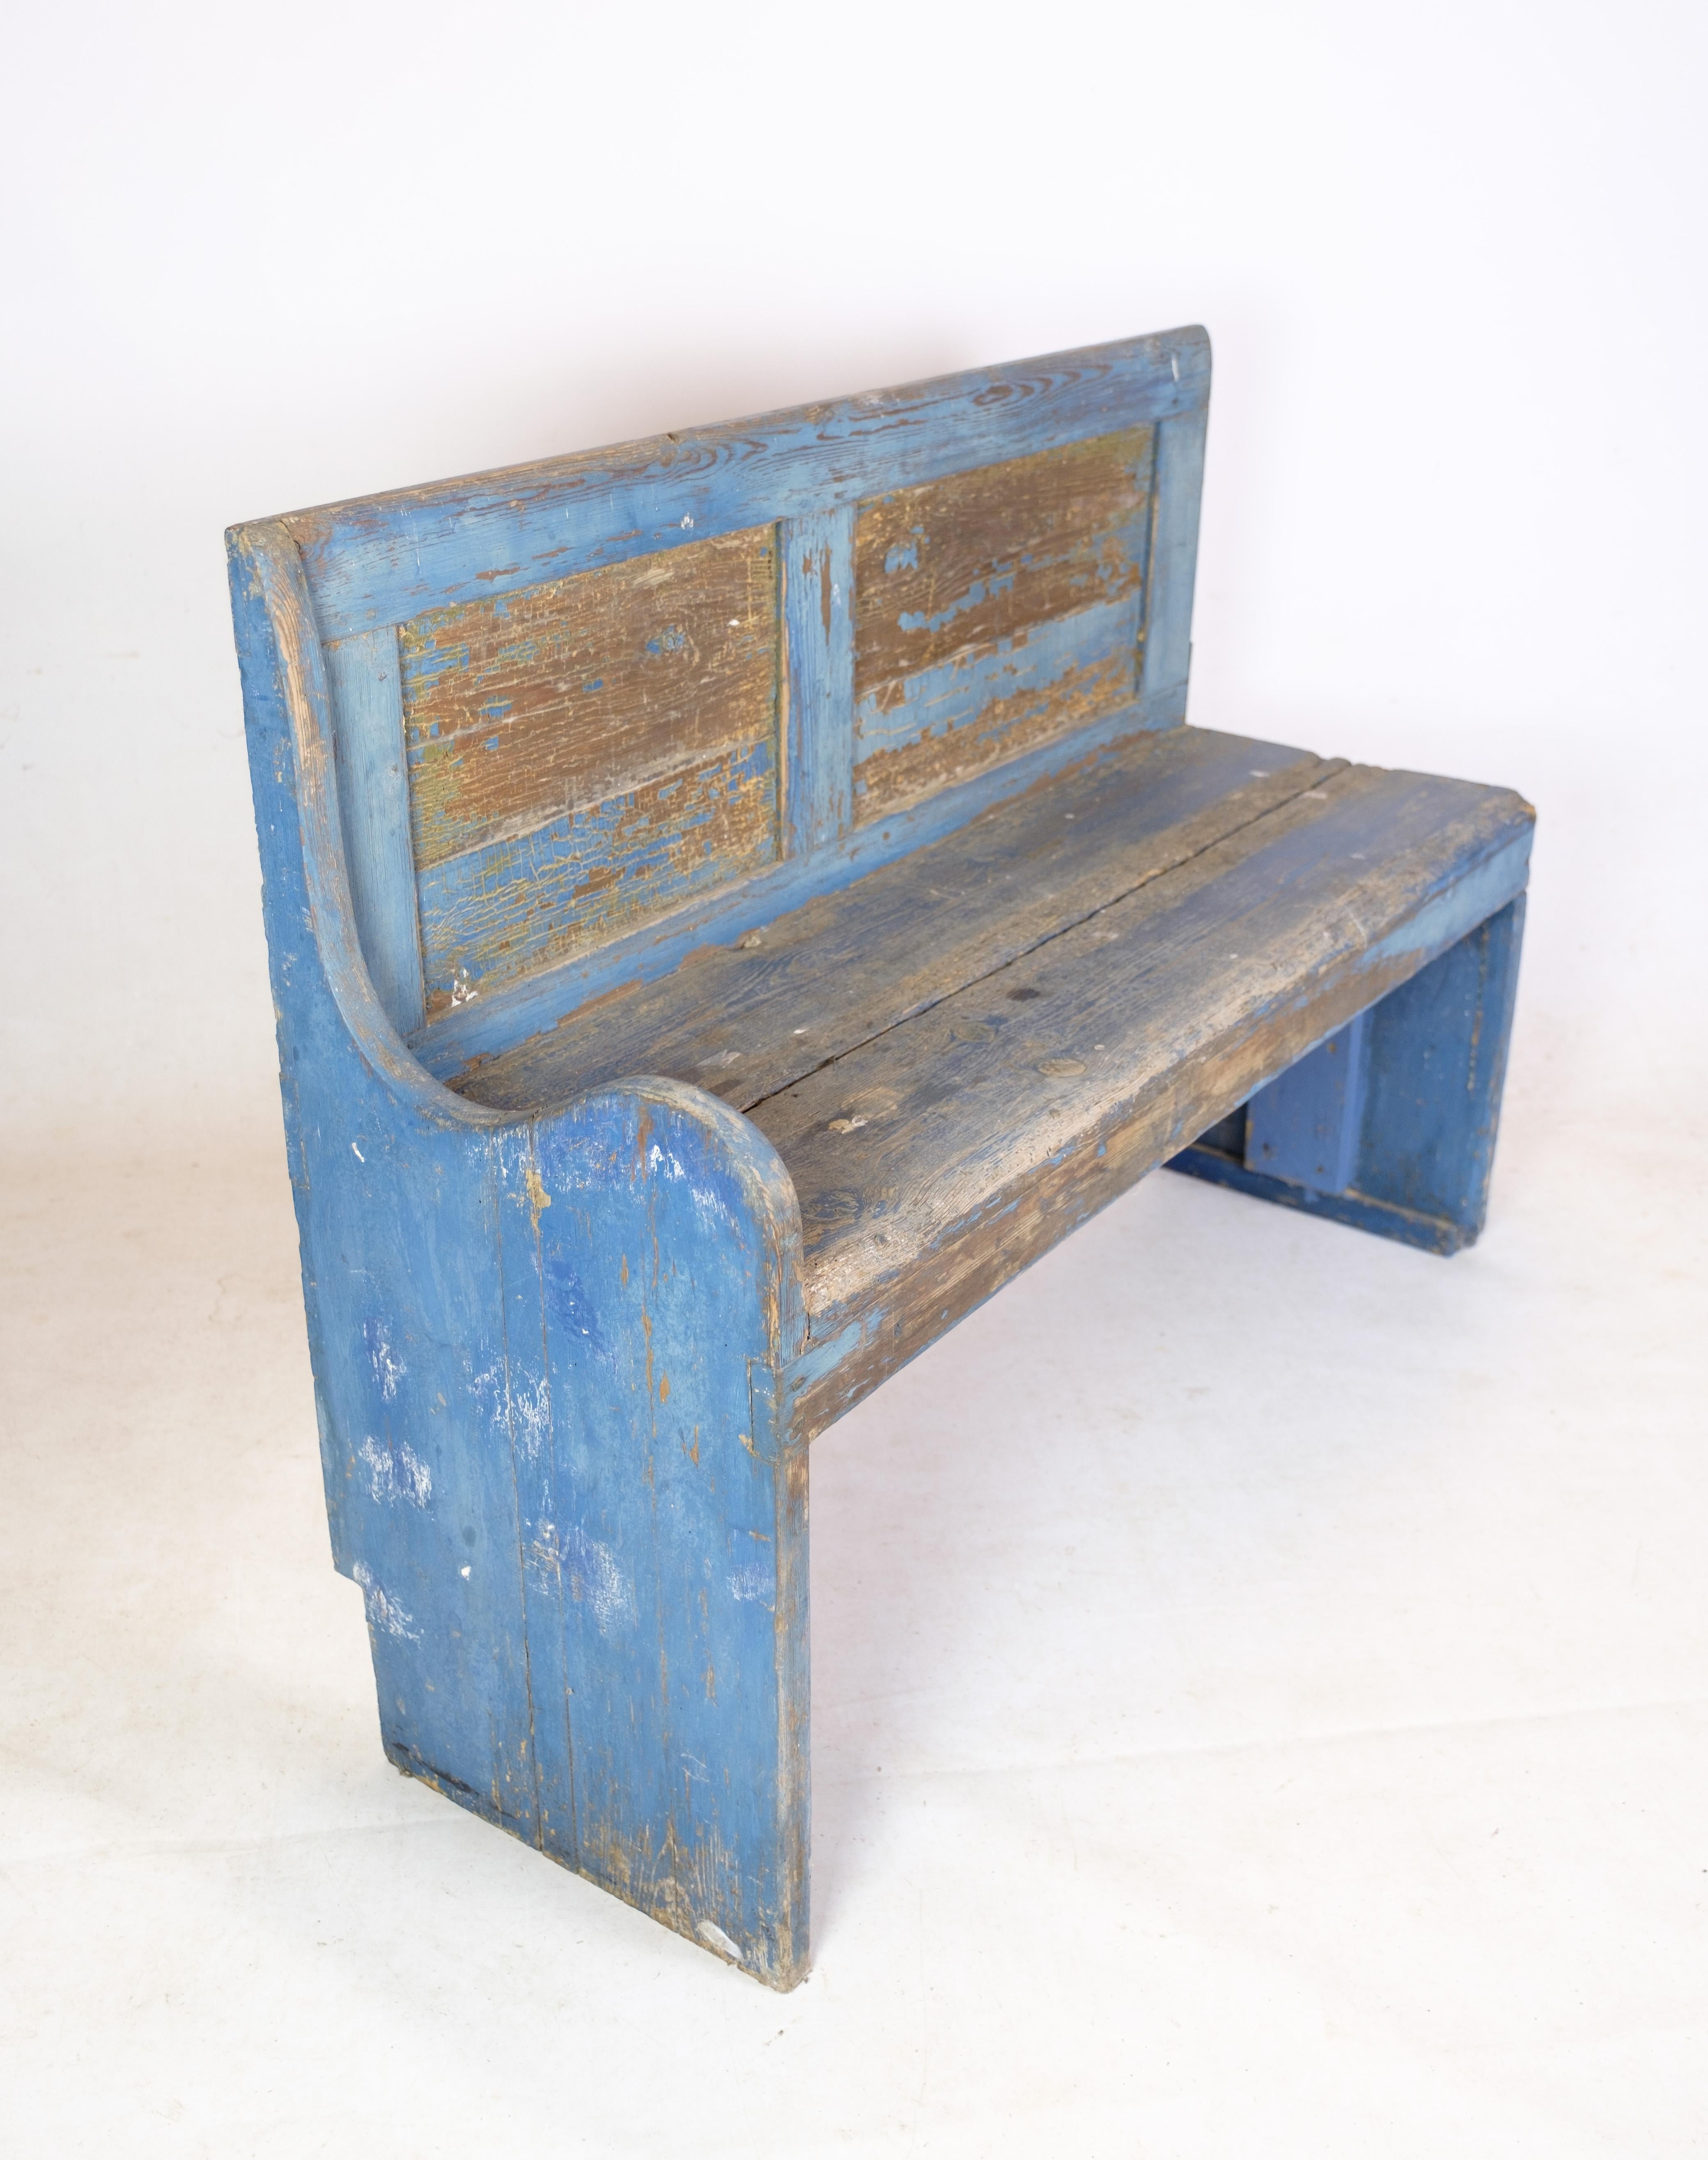 Danish Blue Painted Bench in Pine Wood From The 1840s For Sale